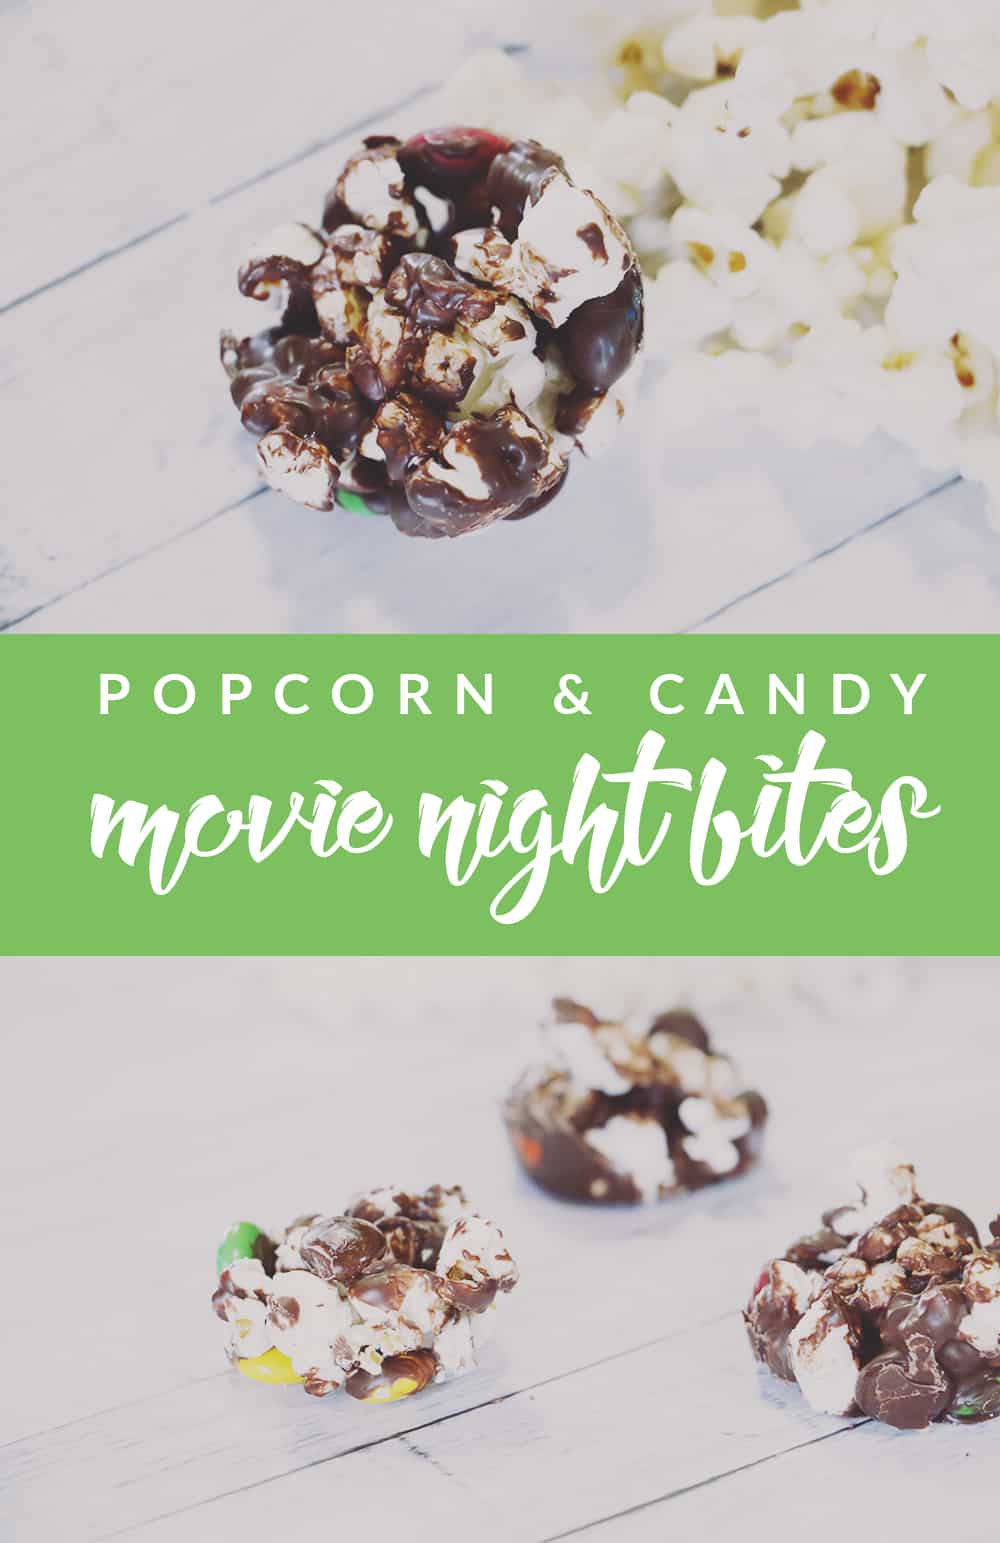 These popcorn and candy movie night bites are a fun, indulgent way to enjoy movie night at home! They're the perfect combination of salty and sweet, too!